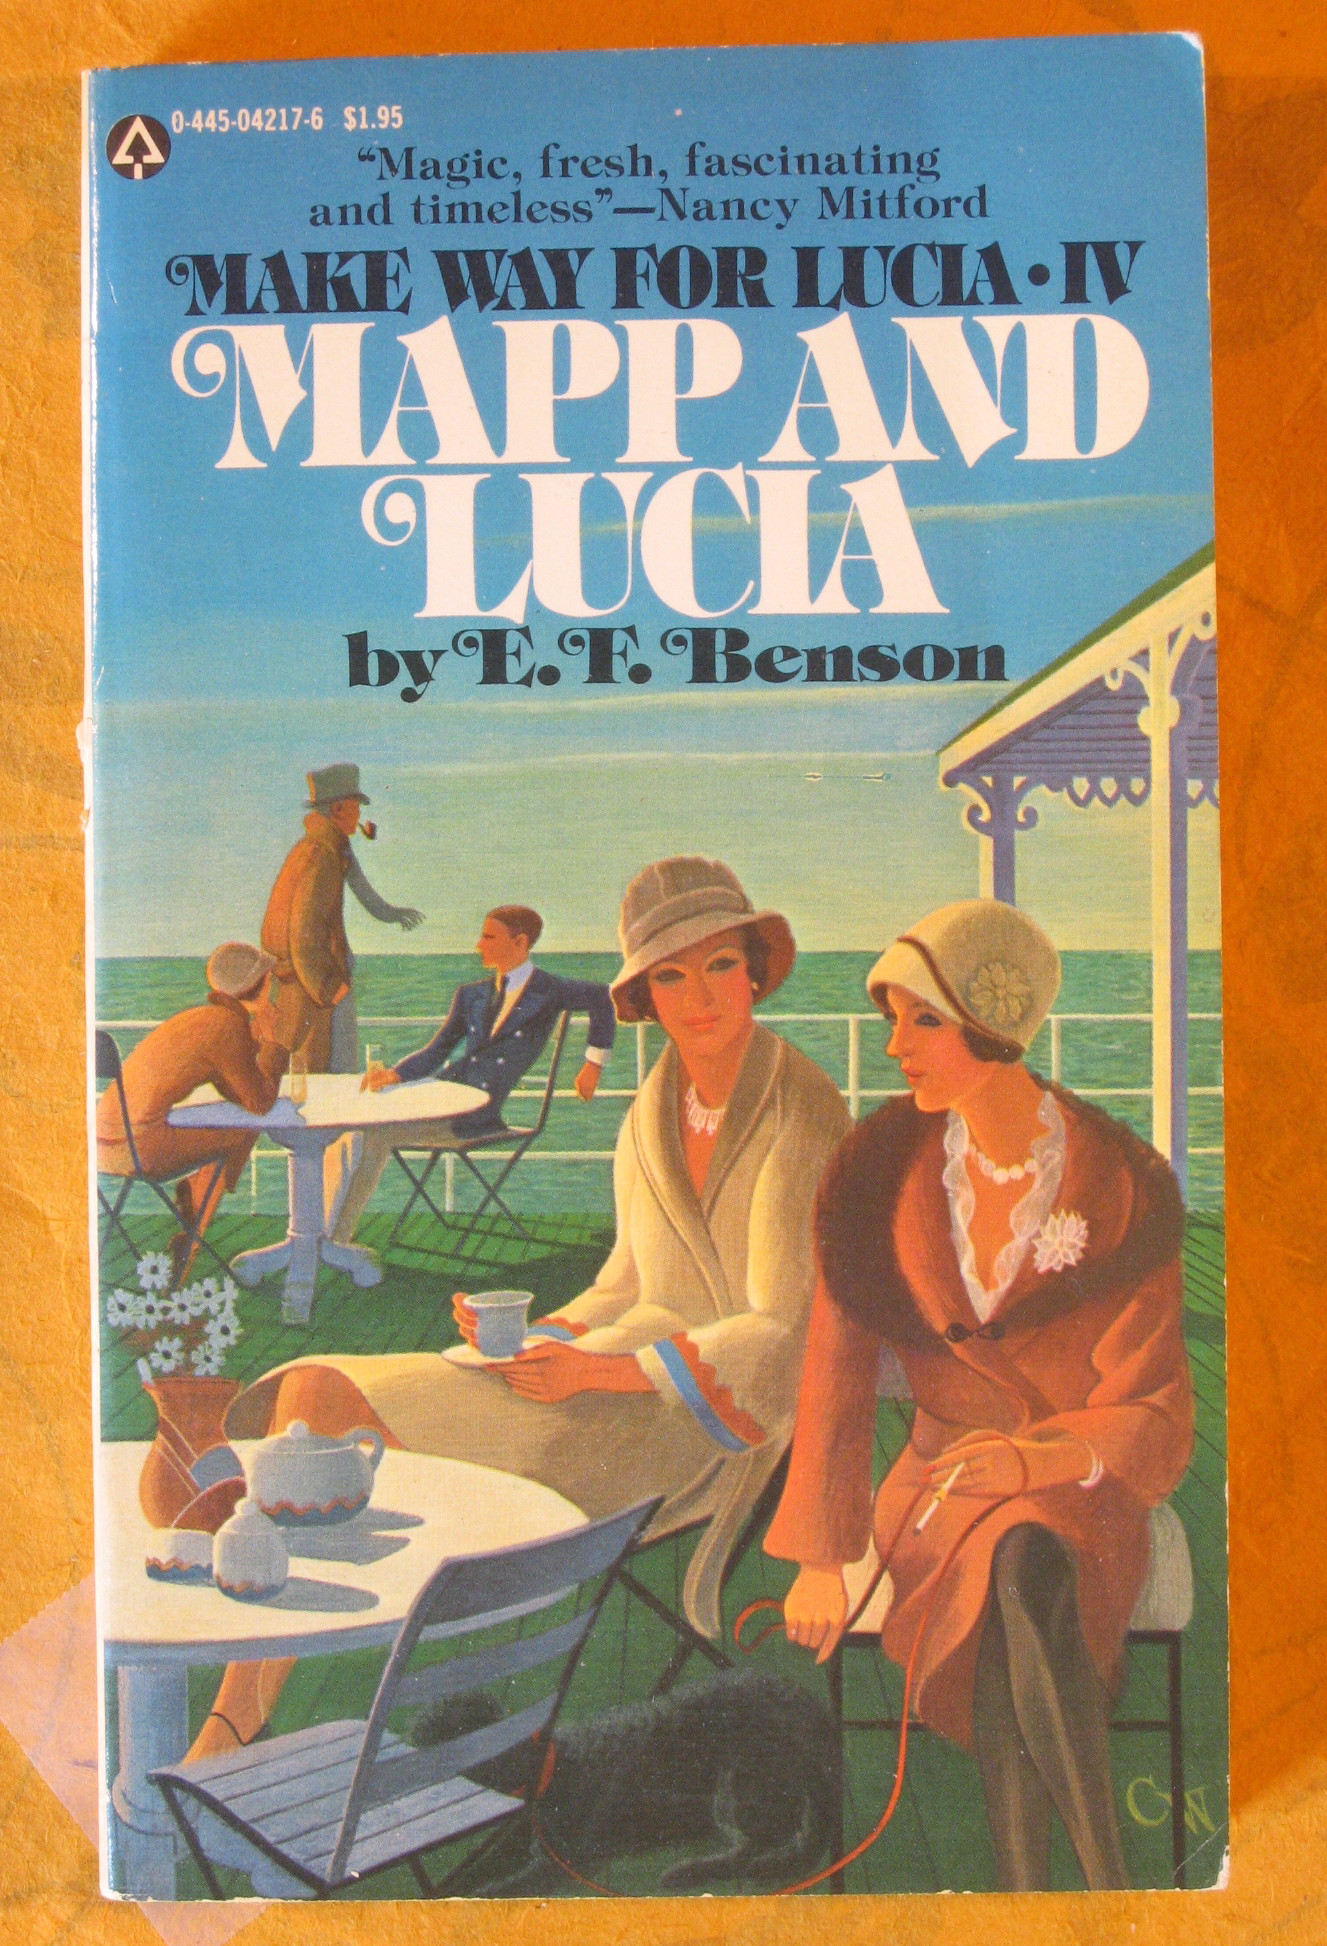 Image for Mapp and Lucia (Make Way for Lucia IV)